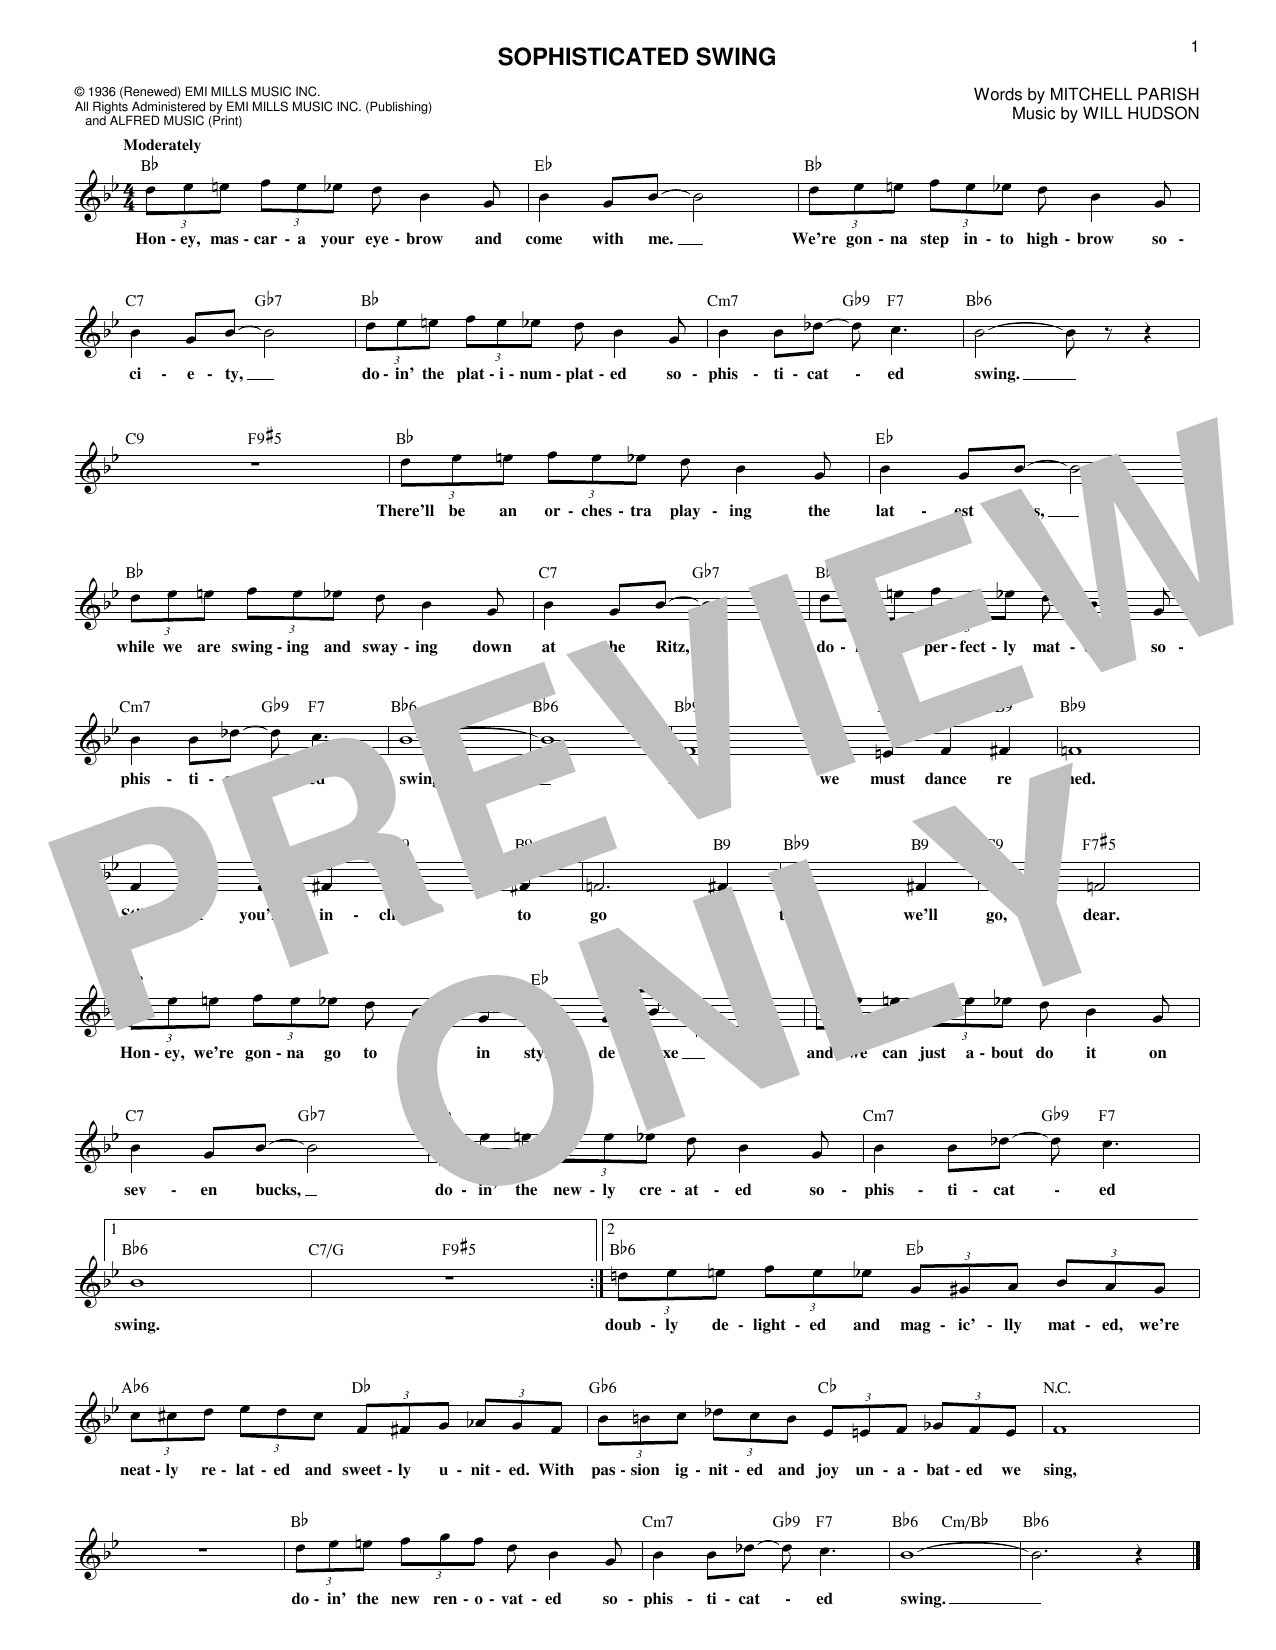 Mitchell Parish Sophisticated Swing sheet music notes and chords. Download Printable PDF.